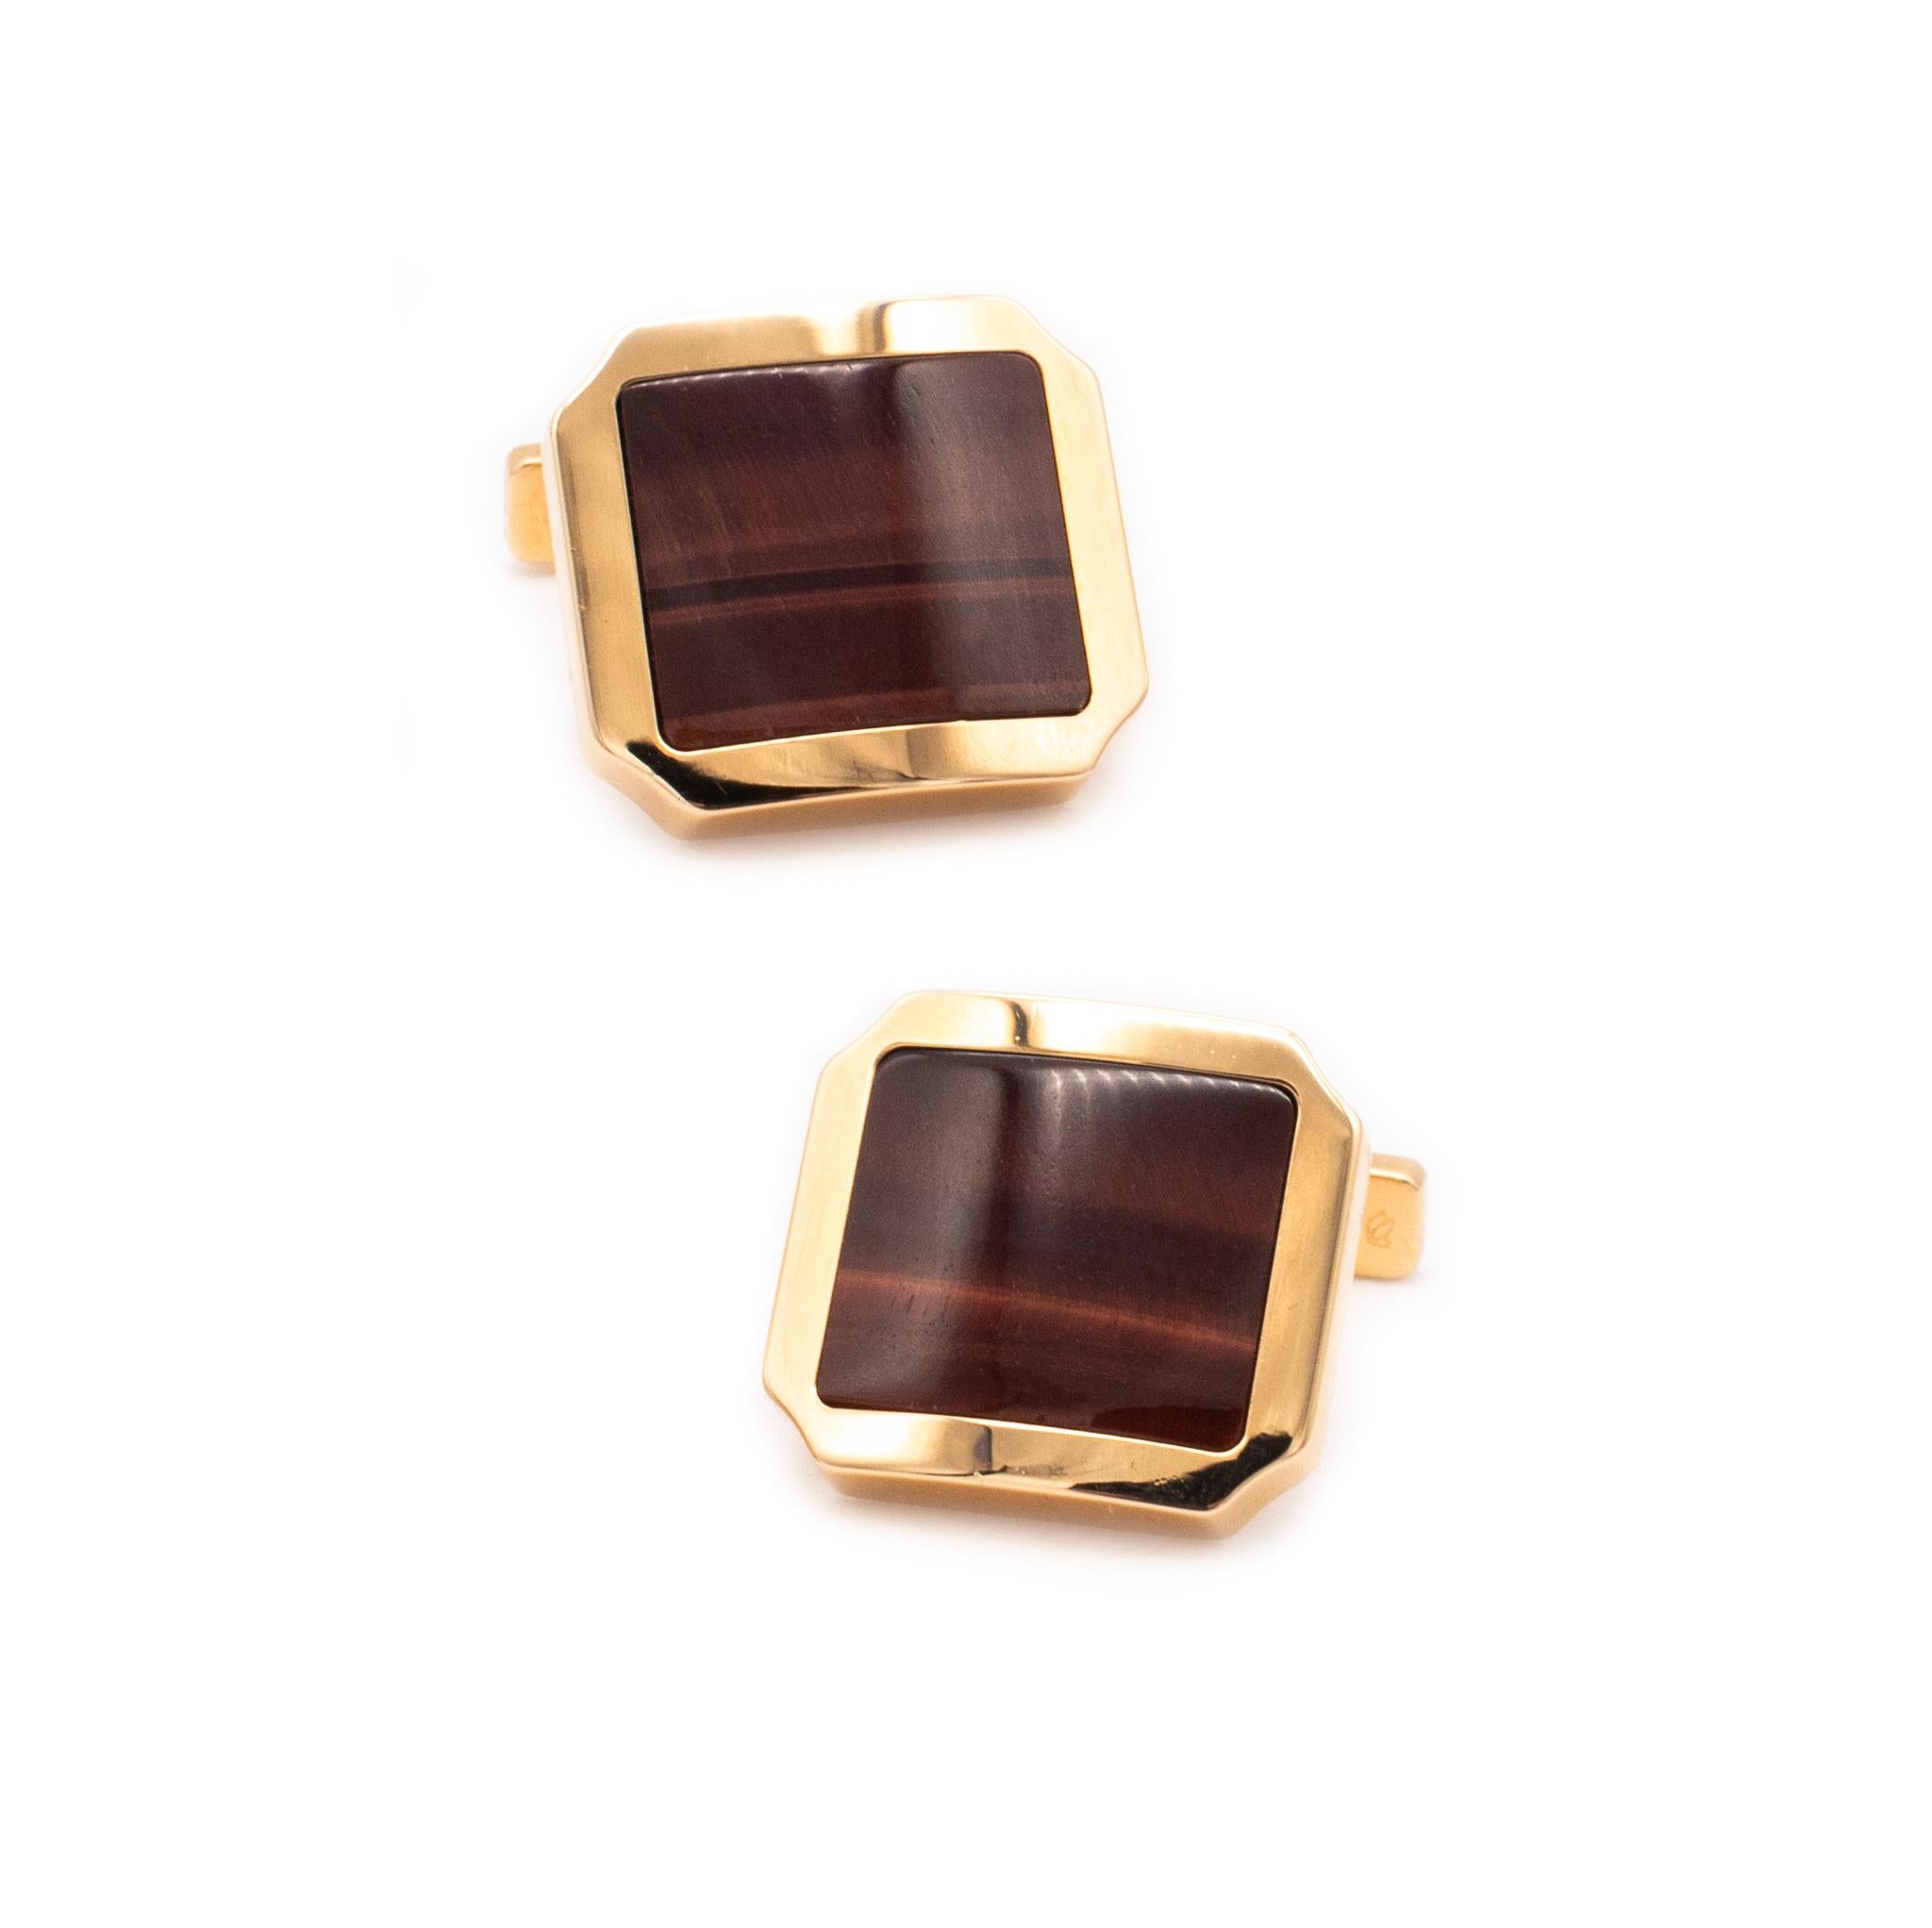 A pair of Santos cufflinks designed by Cartier.

Modern creation, made in Paris, France by the house of Cartier. This pair of cufflinks are part of the Santos de Cartier collection, crafted in solid yellow gold of 18 karats and finished, with very